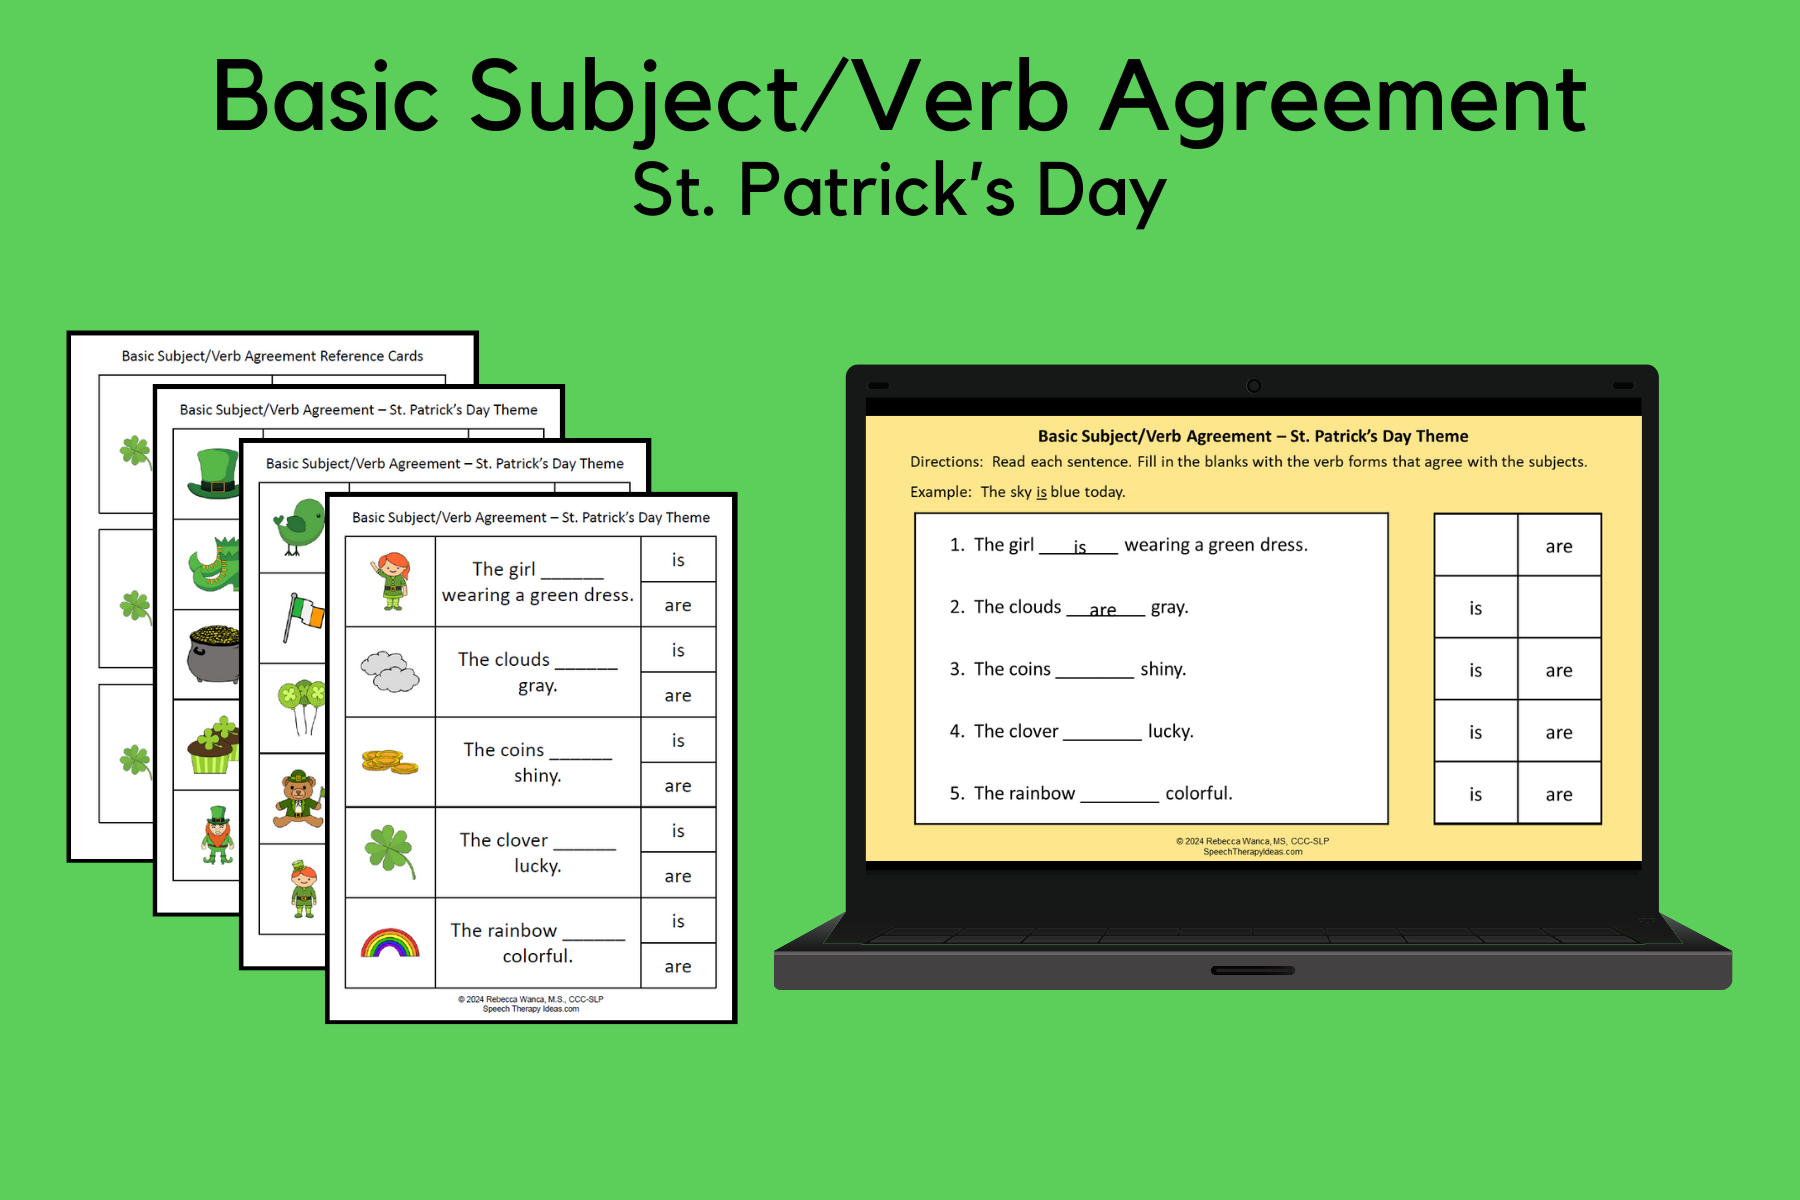 Basic Subject/Verb Agreement for St. Patrick's Day